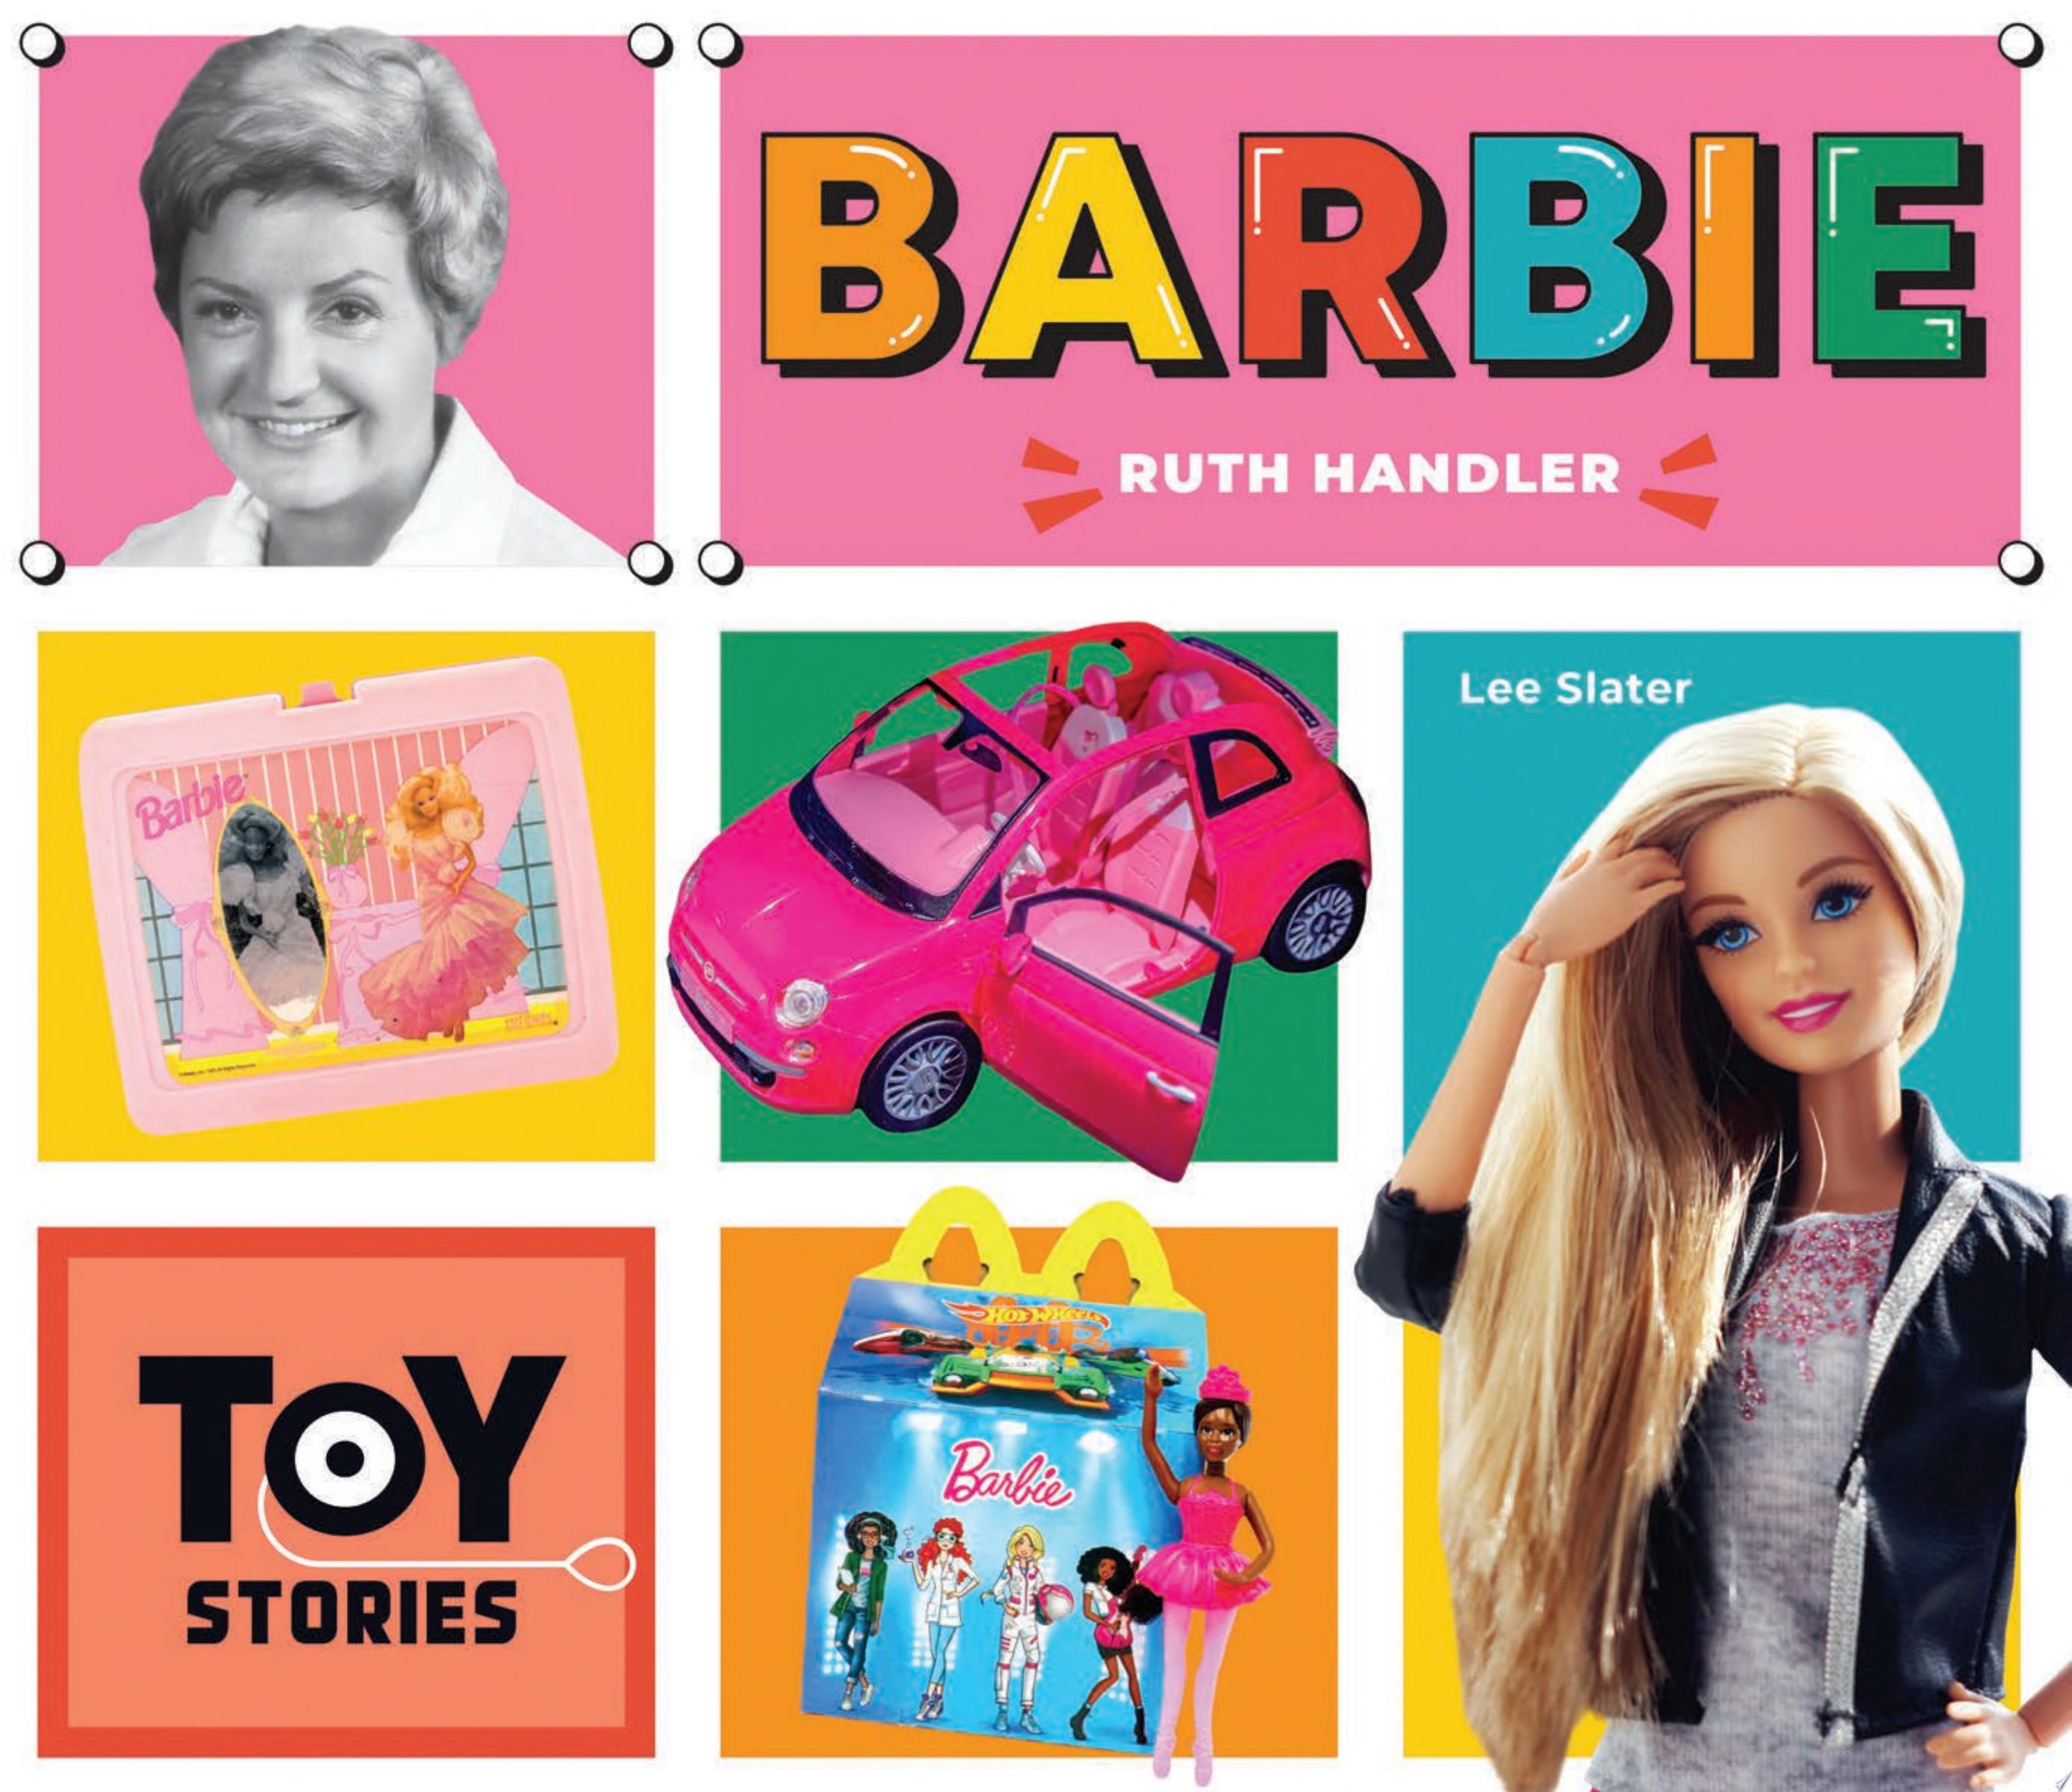 Image for "Barbie"